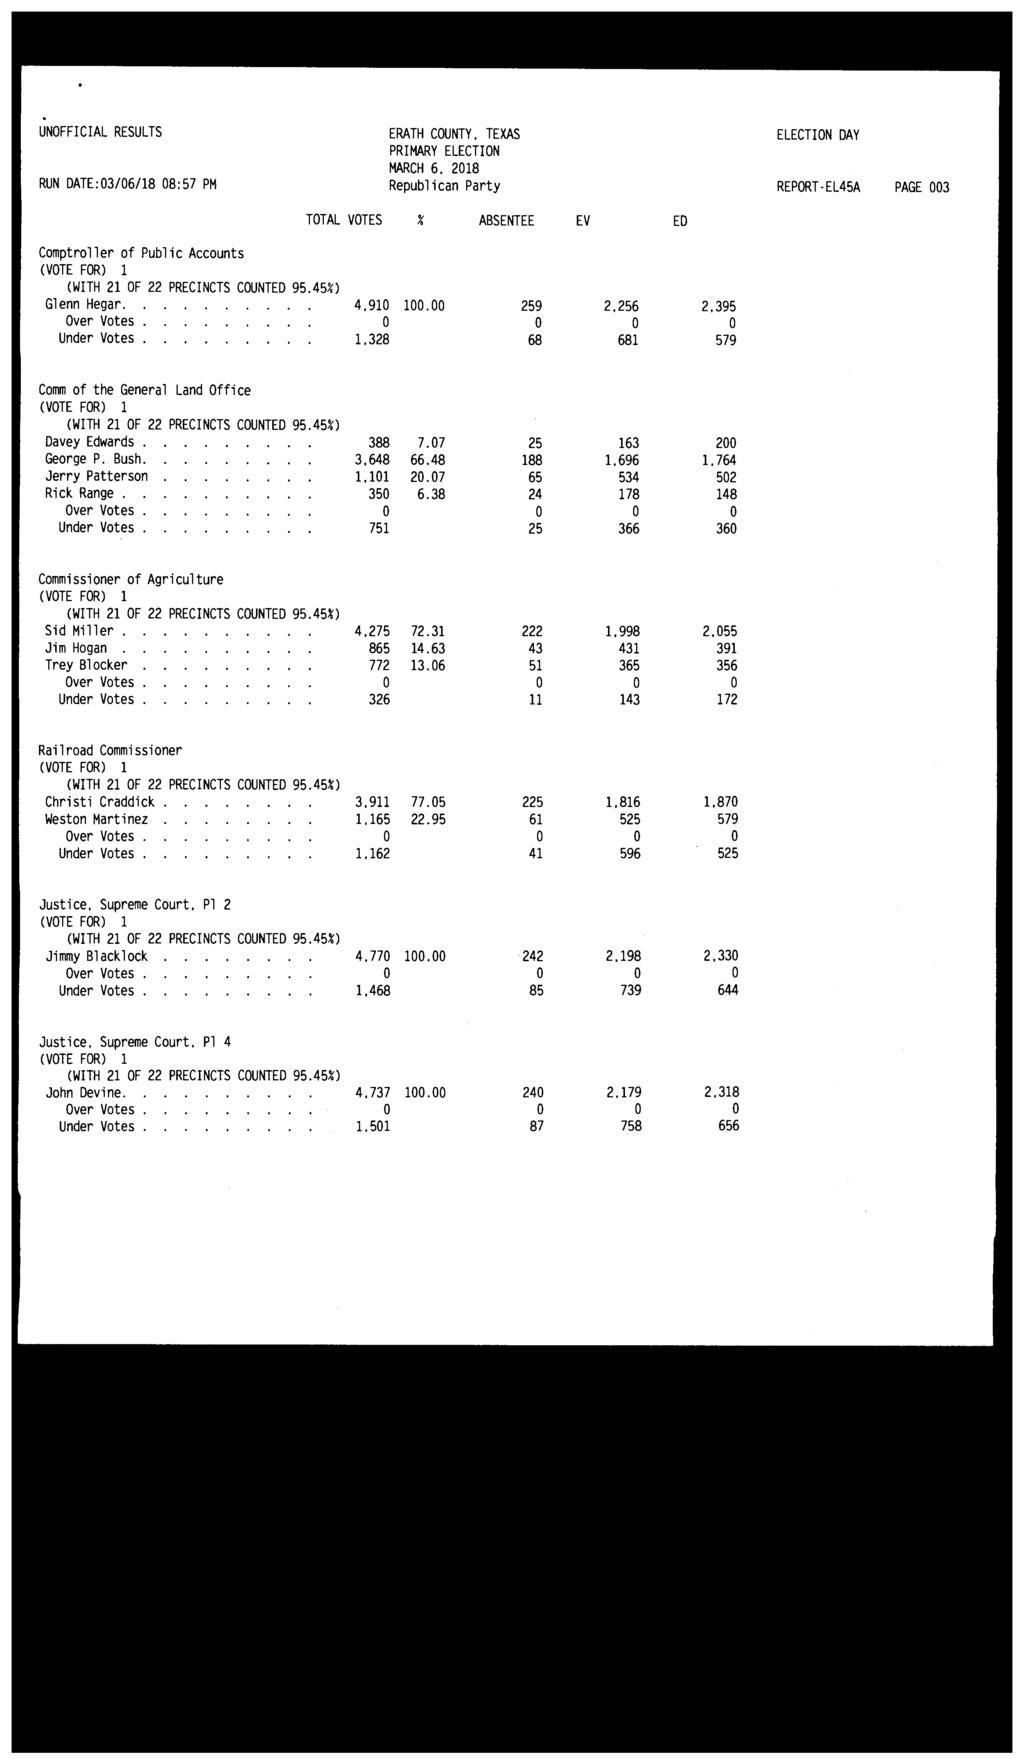 UNOFFICIAL RESULTS ERATH COUNTY. TEXAS ELECTION DAY MARCH 6. 2018 RUN DATE:03/06/18 08:57 PM Republican Party REPORT-EL45A PAGE 003 Comptroller of Public Accounts Glenn Hegar. 4,910 100.